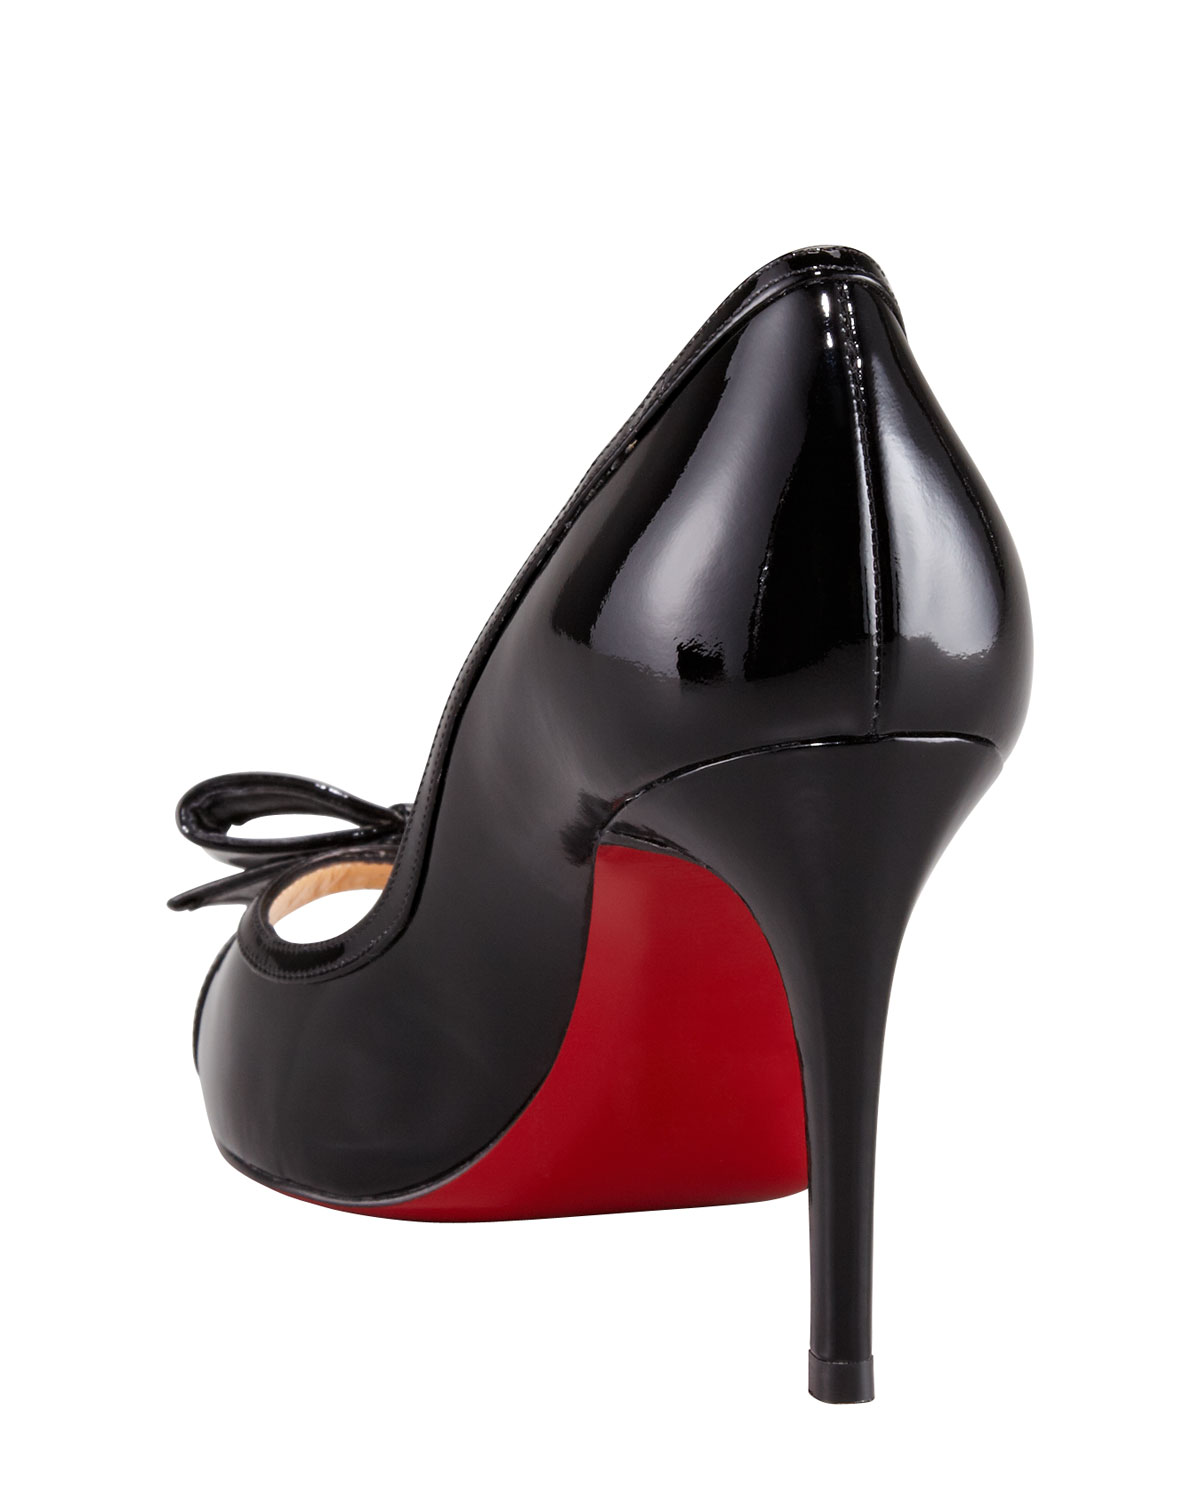 christian louboutin patent leather bow pumps, louis vuitton red bottom ...